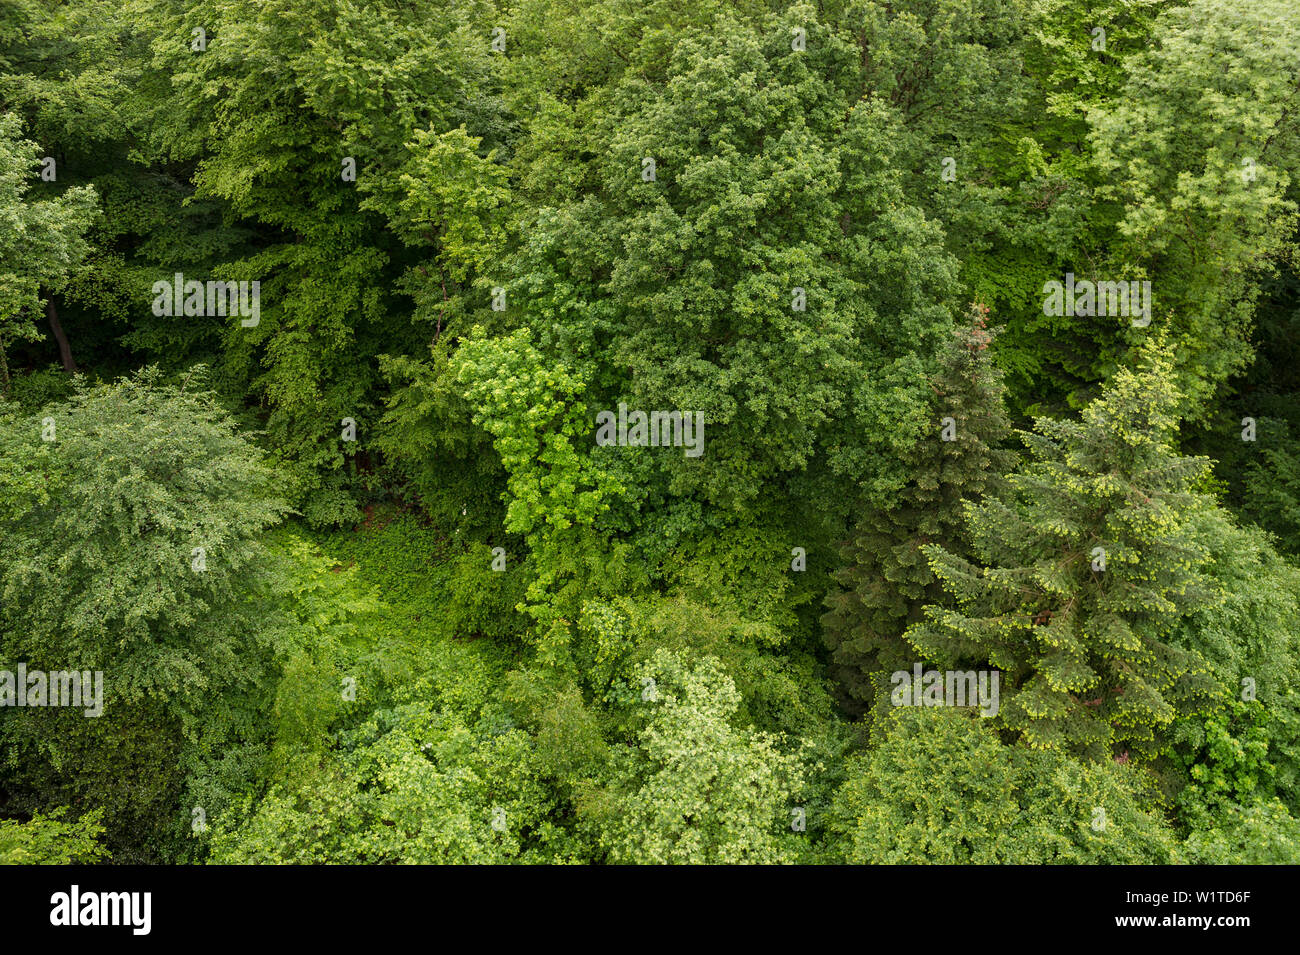 Aerial view of a mixed forest, spruce (Picea abies), beech (Fagus sylvatica) and wild cherry (Prunus avium), Emmendingen, Baden-Wuerttemberg, Germany Stock Photo